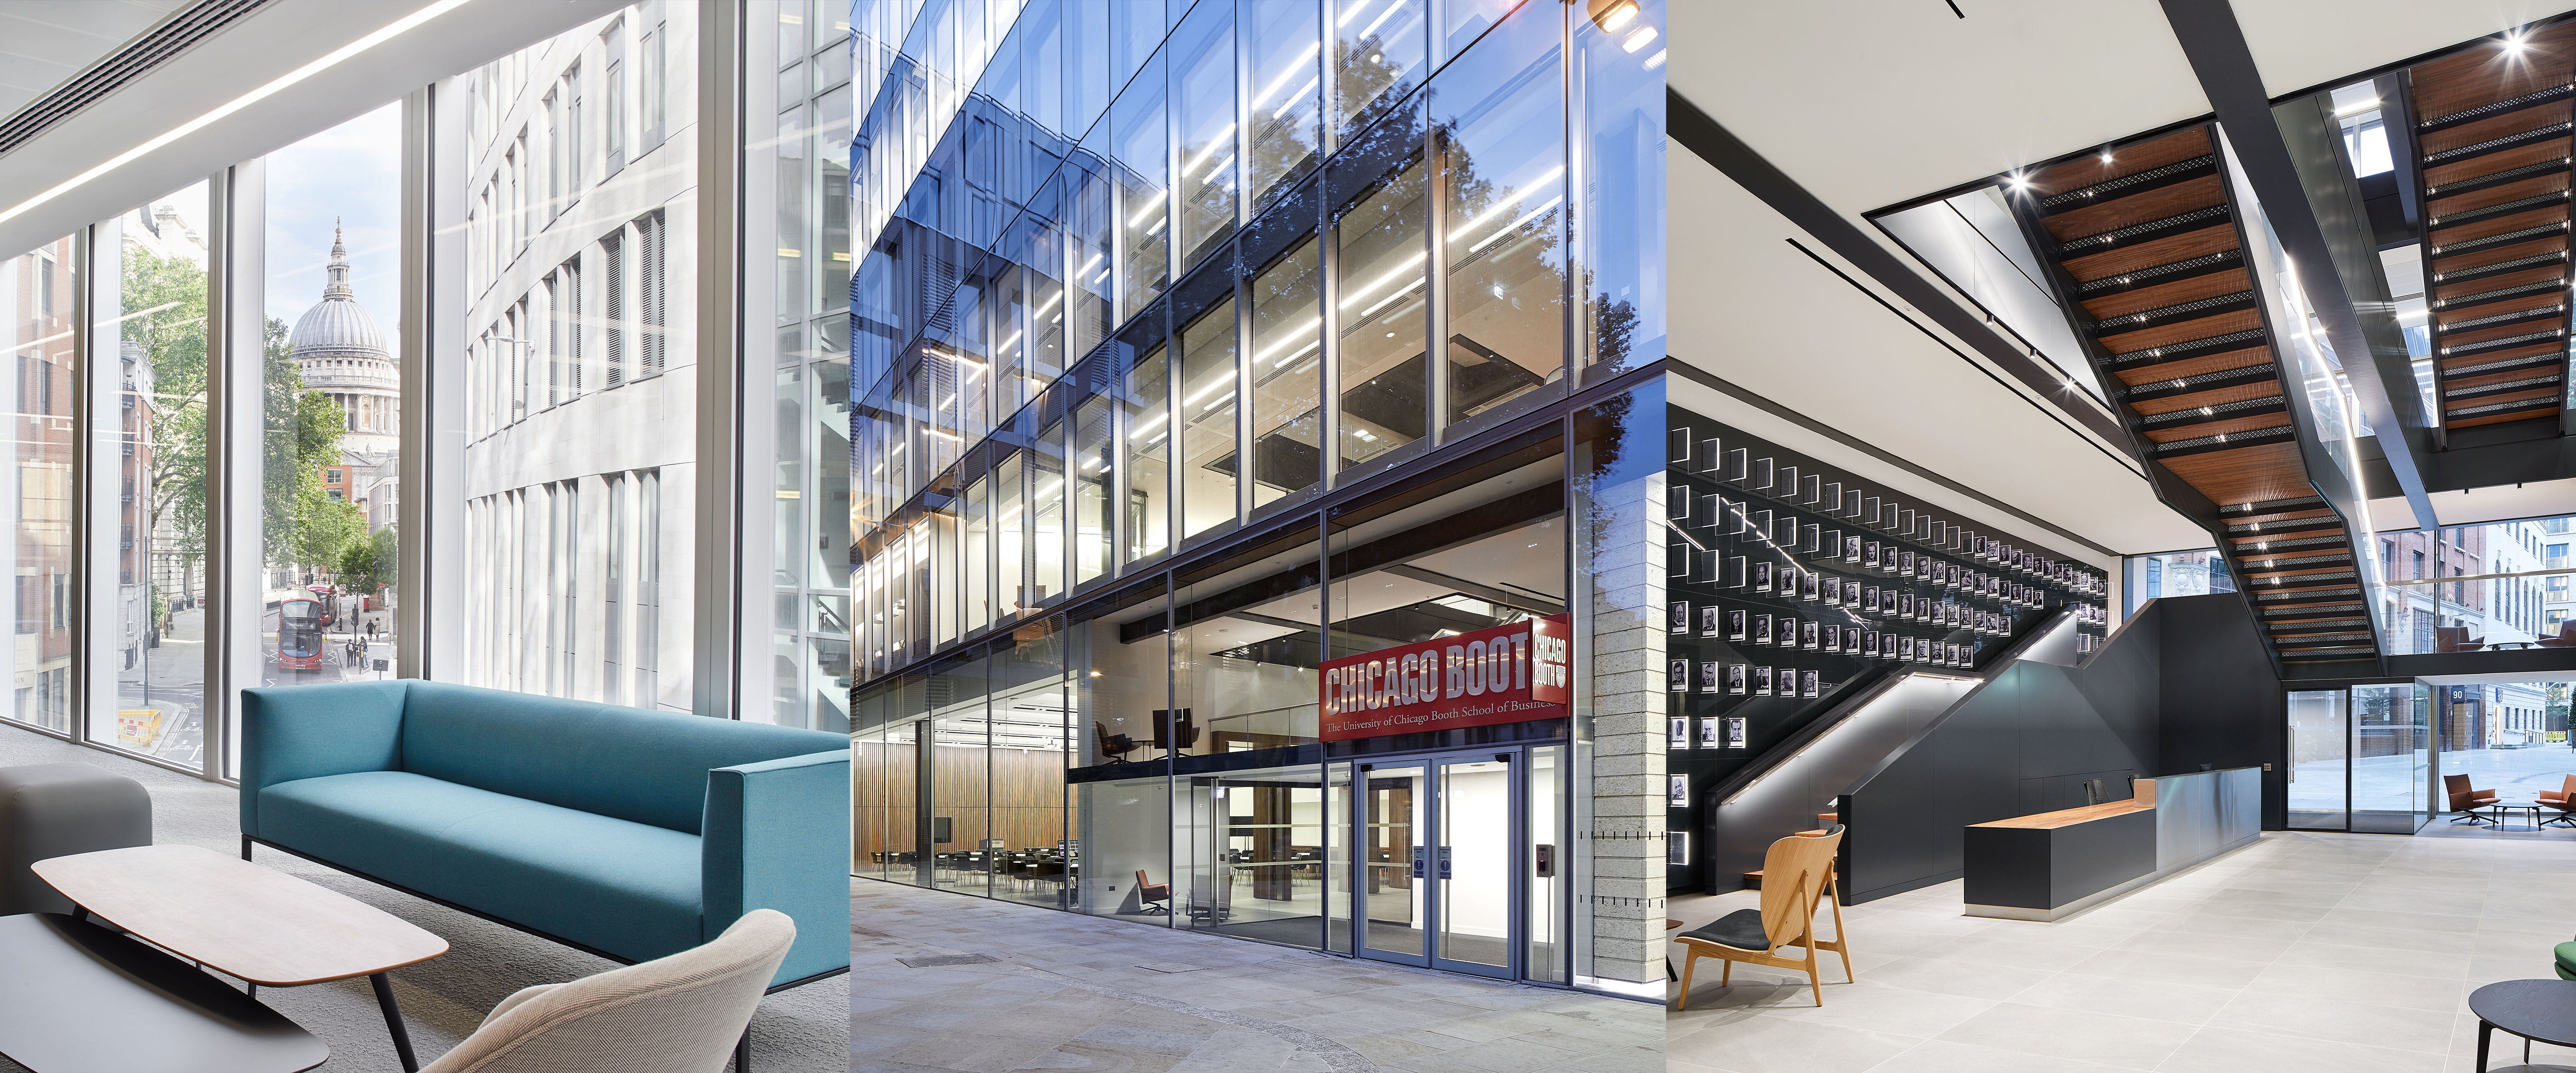 Chicago Booth Completes New State-of-the-Art Campus in London